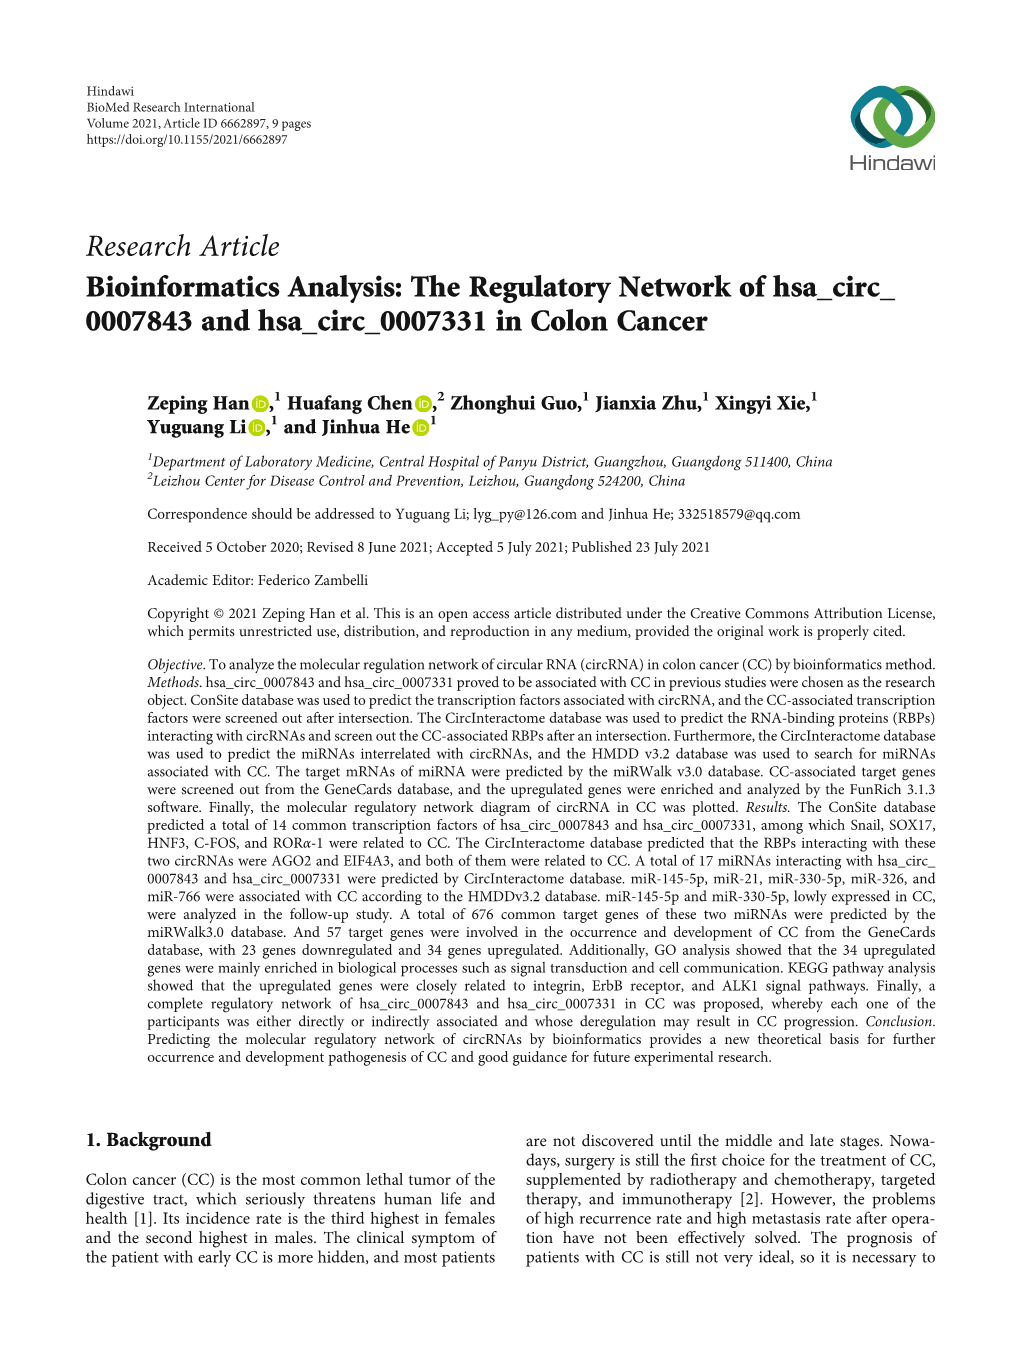 Bioinformatics Analysis: the Regulatory Network of Hsa Circ 0007843 and Hsa Circ 0007331 in Colon Cancer